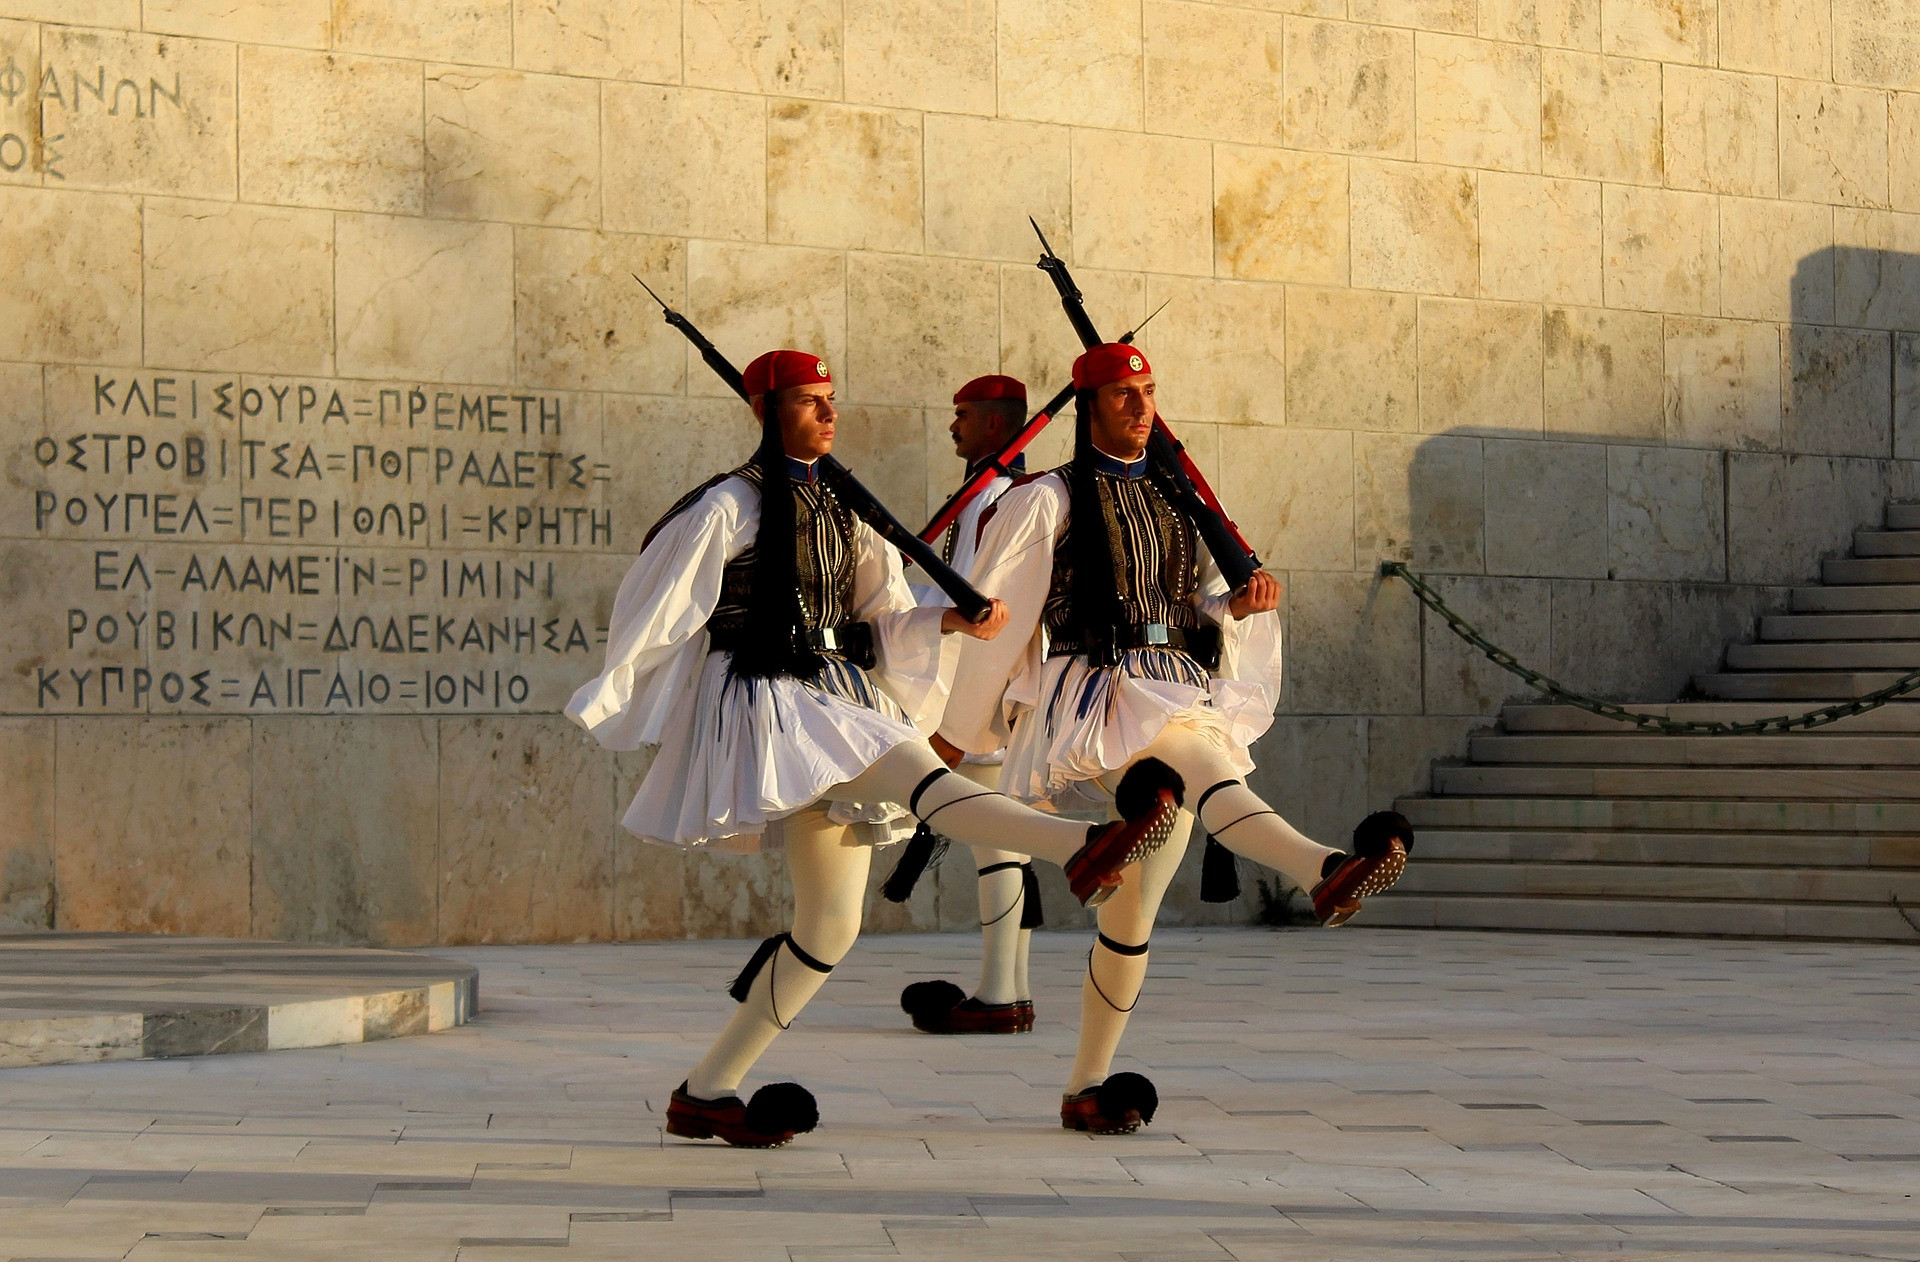 Parliament Soldiers at Syntagma Square